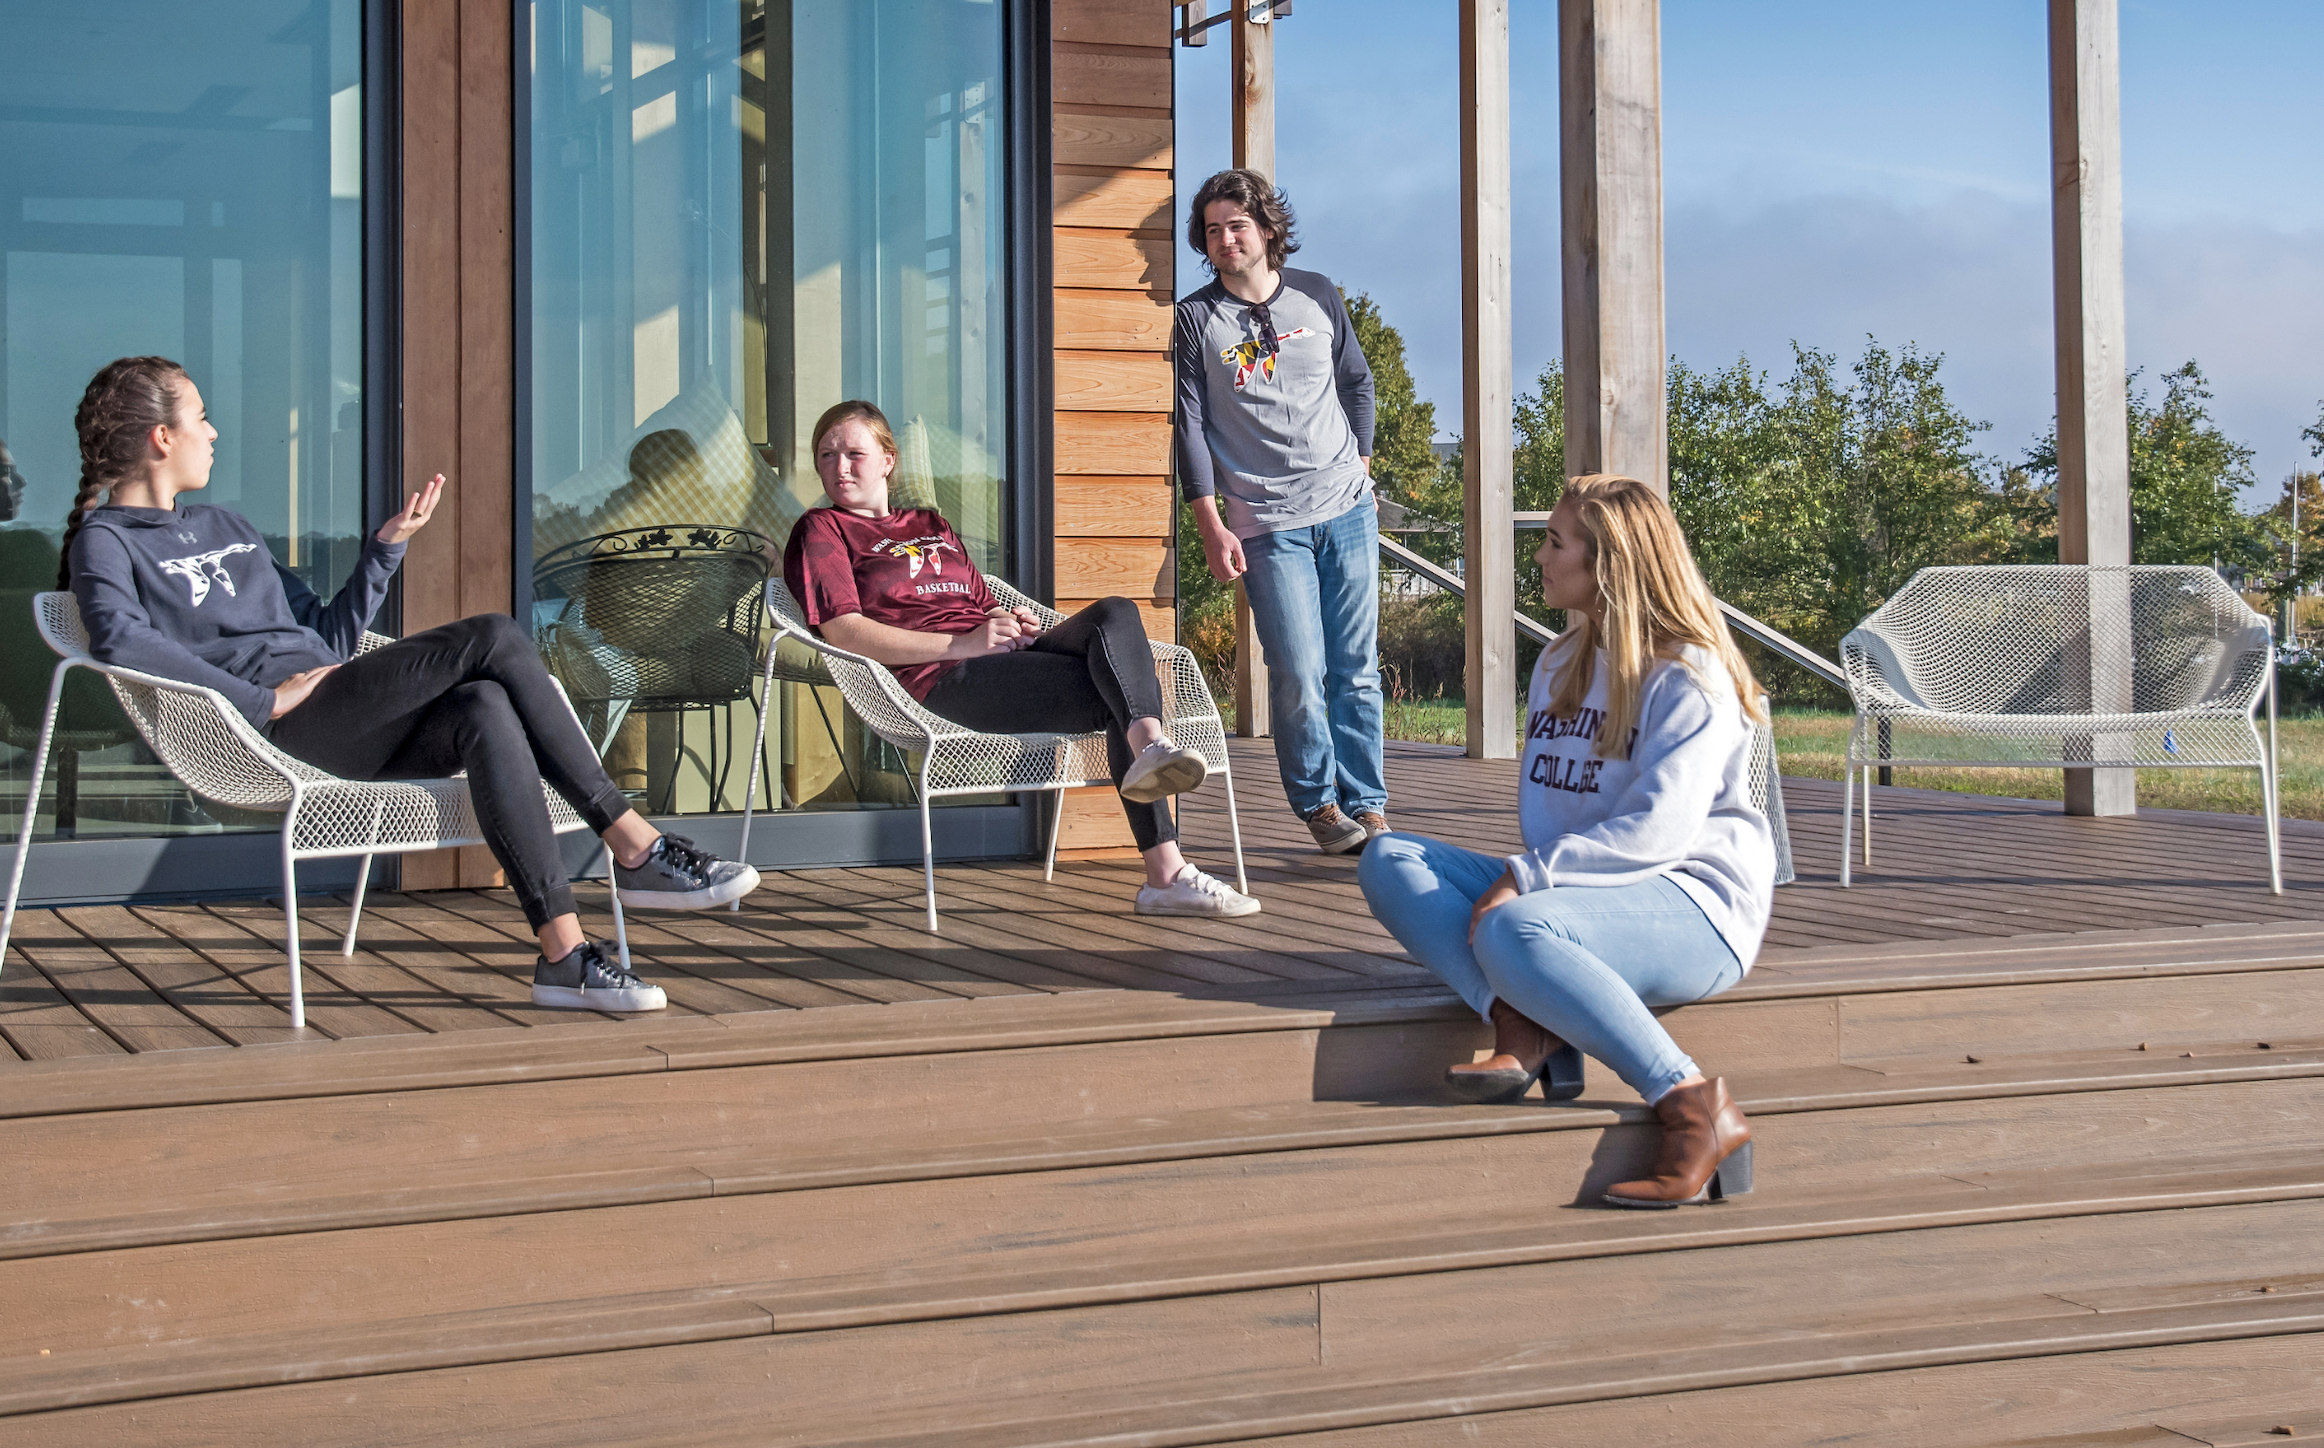 Washington College students sit on the deck at the boathouse having a conversation